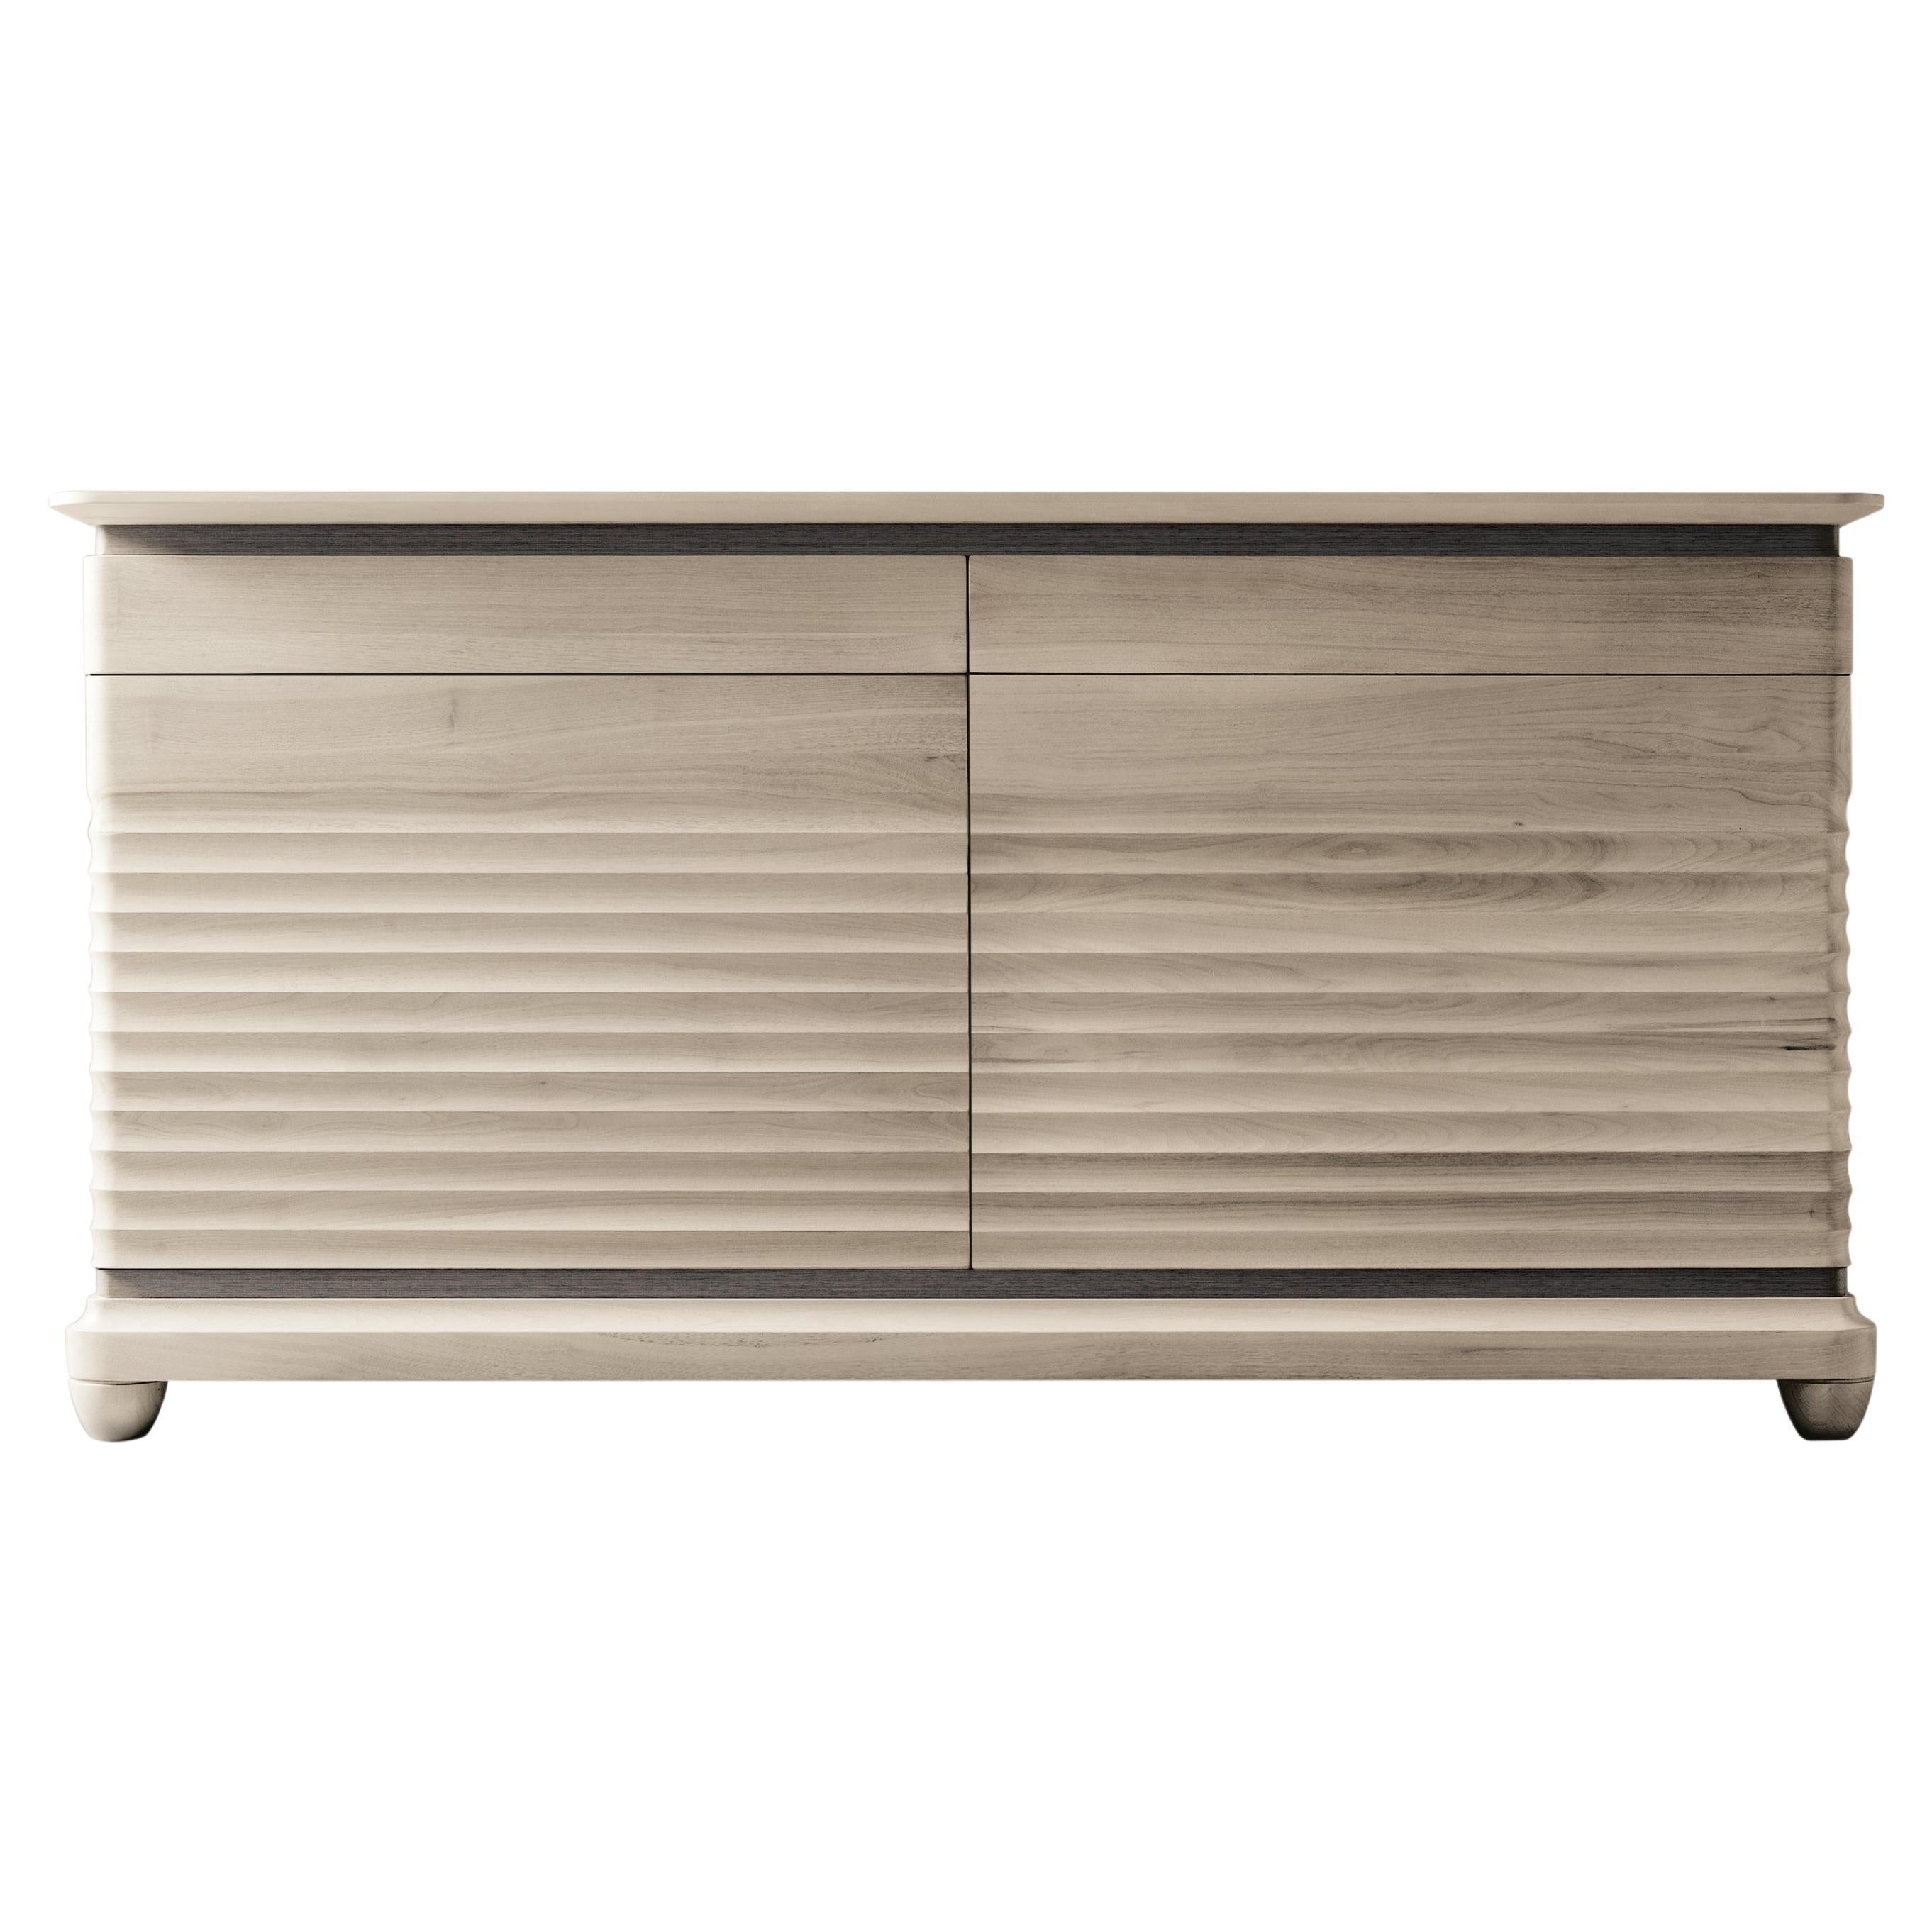 Traccia Solid Wood Sideboard, Walnut in Natural Grey Finish, Contemporary